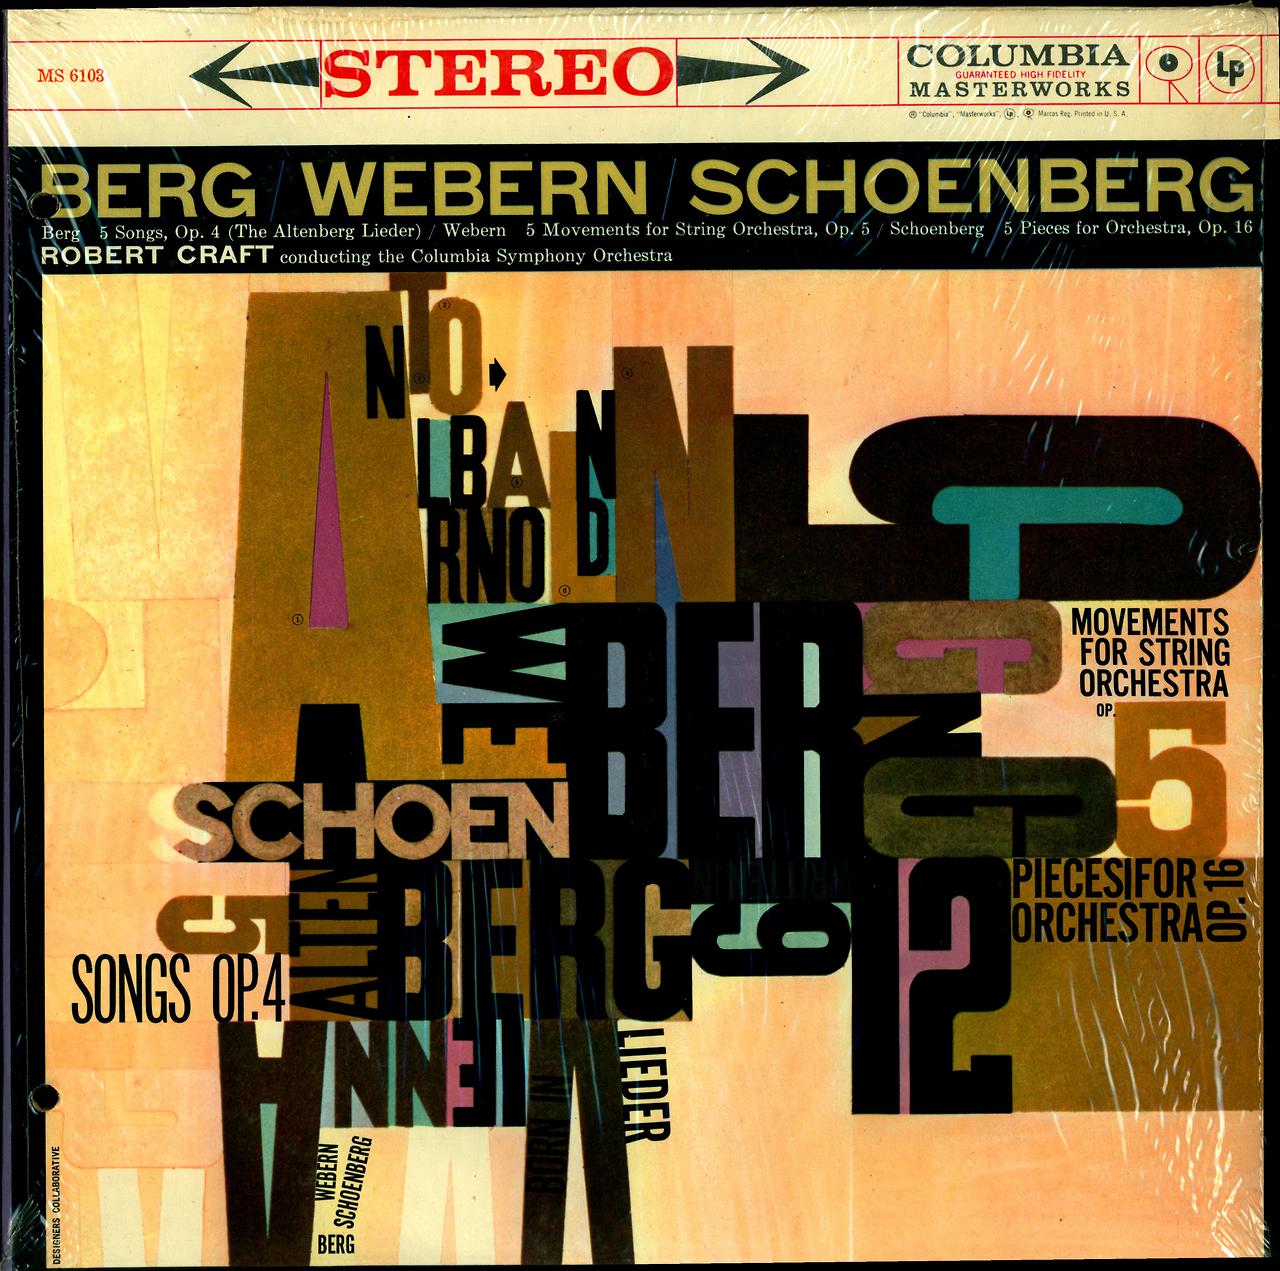 Berg- 5 Songs, op. 4 Webern 5 Movements for String Orchestra, op. 5 Schoenberg- 5 Pieces for Orchestra, op. 16 Columbia Symphony Orchestra, Robert Craft, cond. Columbia Masterworks MS 6103 Cover Art by Designers Collective